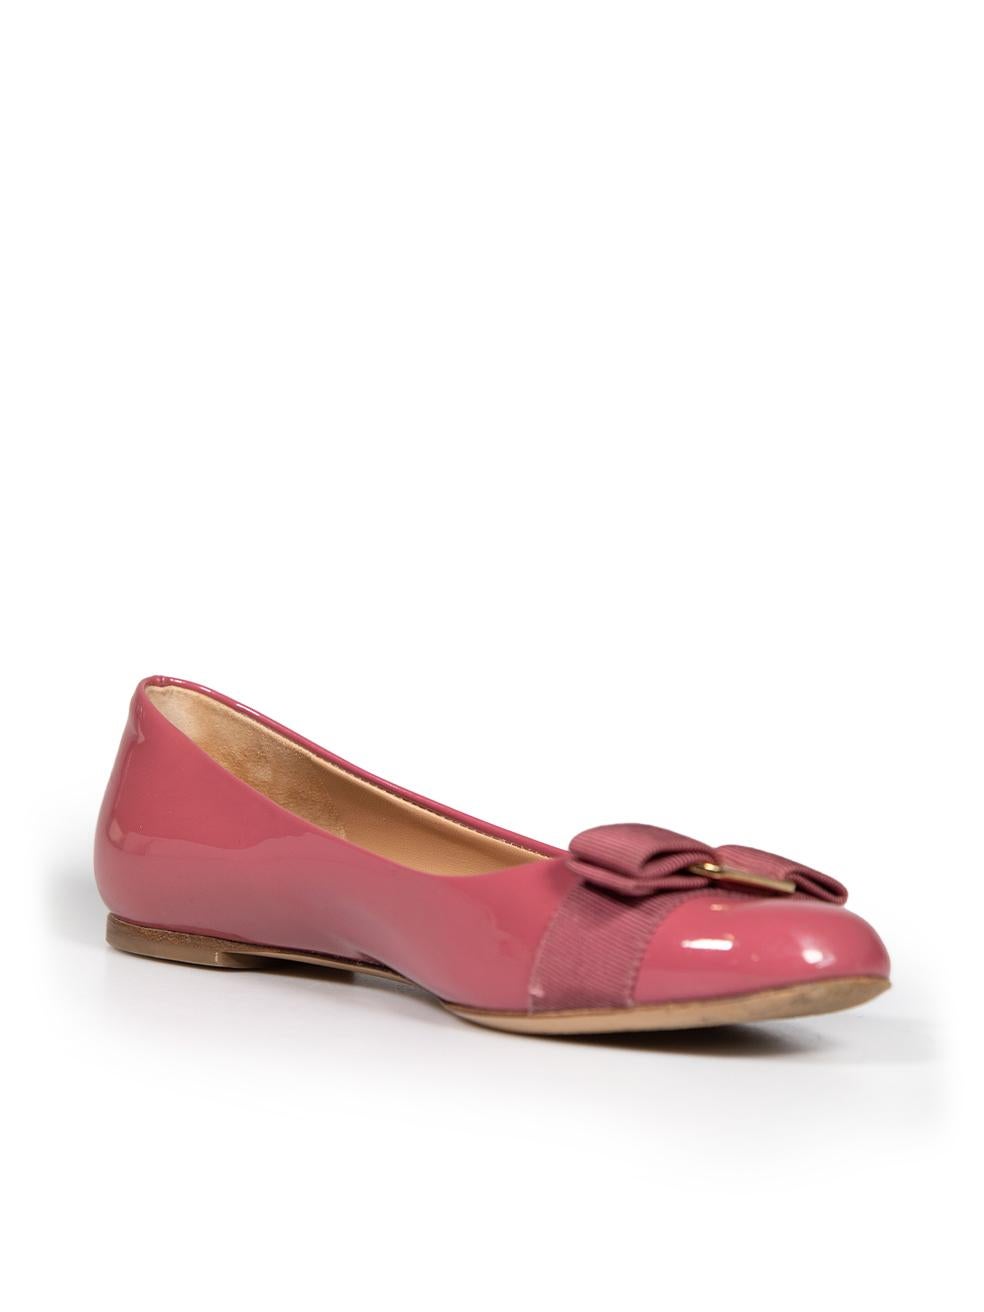 CONDITION is Very good. Minimal wear to ballet flats is evident. Minimal wear to the insoles and bow detailing is seen with discolouration marks and abrasion marks on the sides of this used Salvatore Ferragamo designer resale item.
 
 
 
 Details
 
